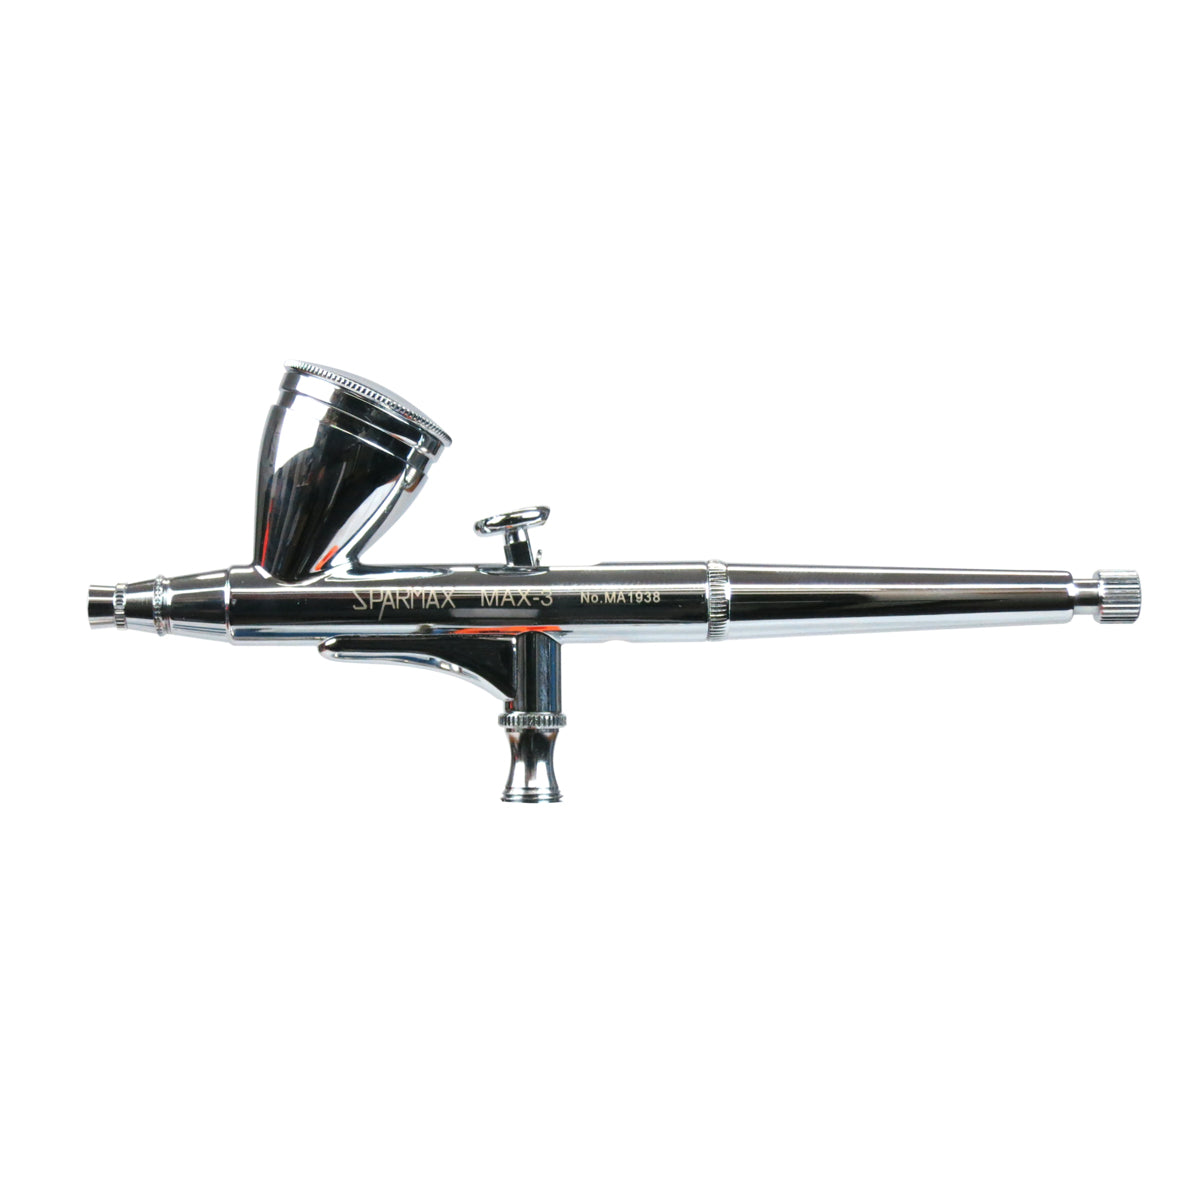 Sparmax Gravity Airbrush 0.3Mm With Pre Set Handle